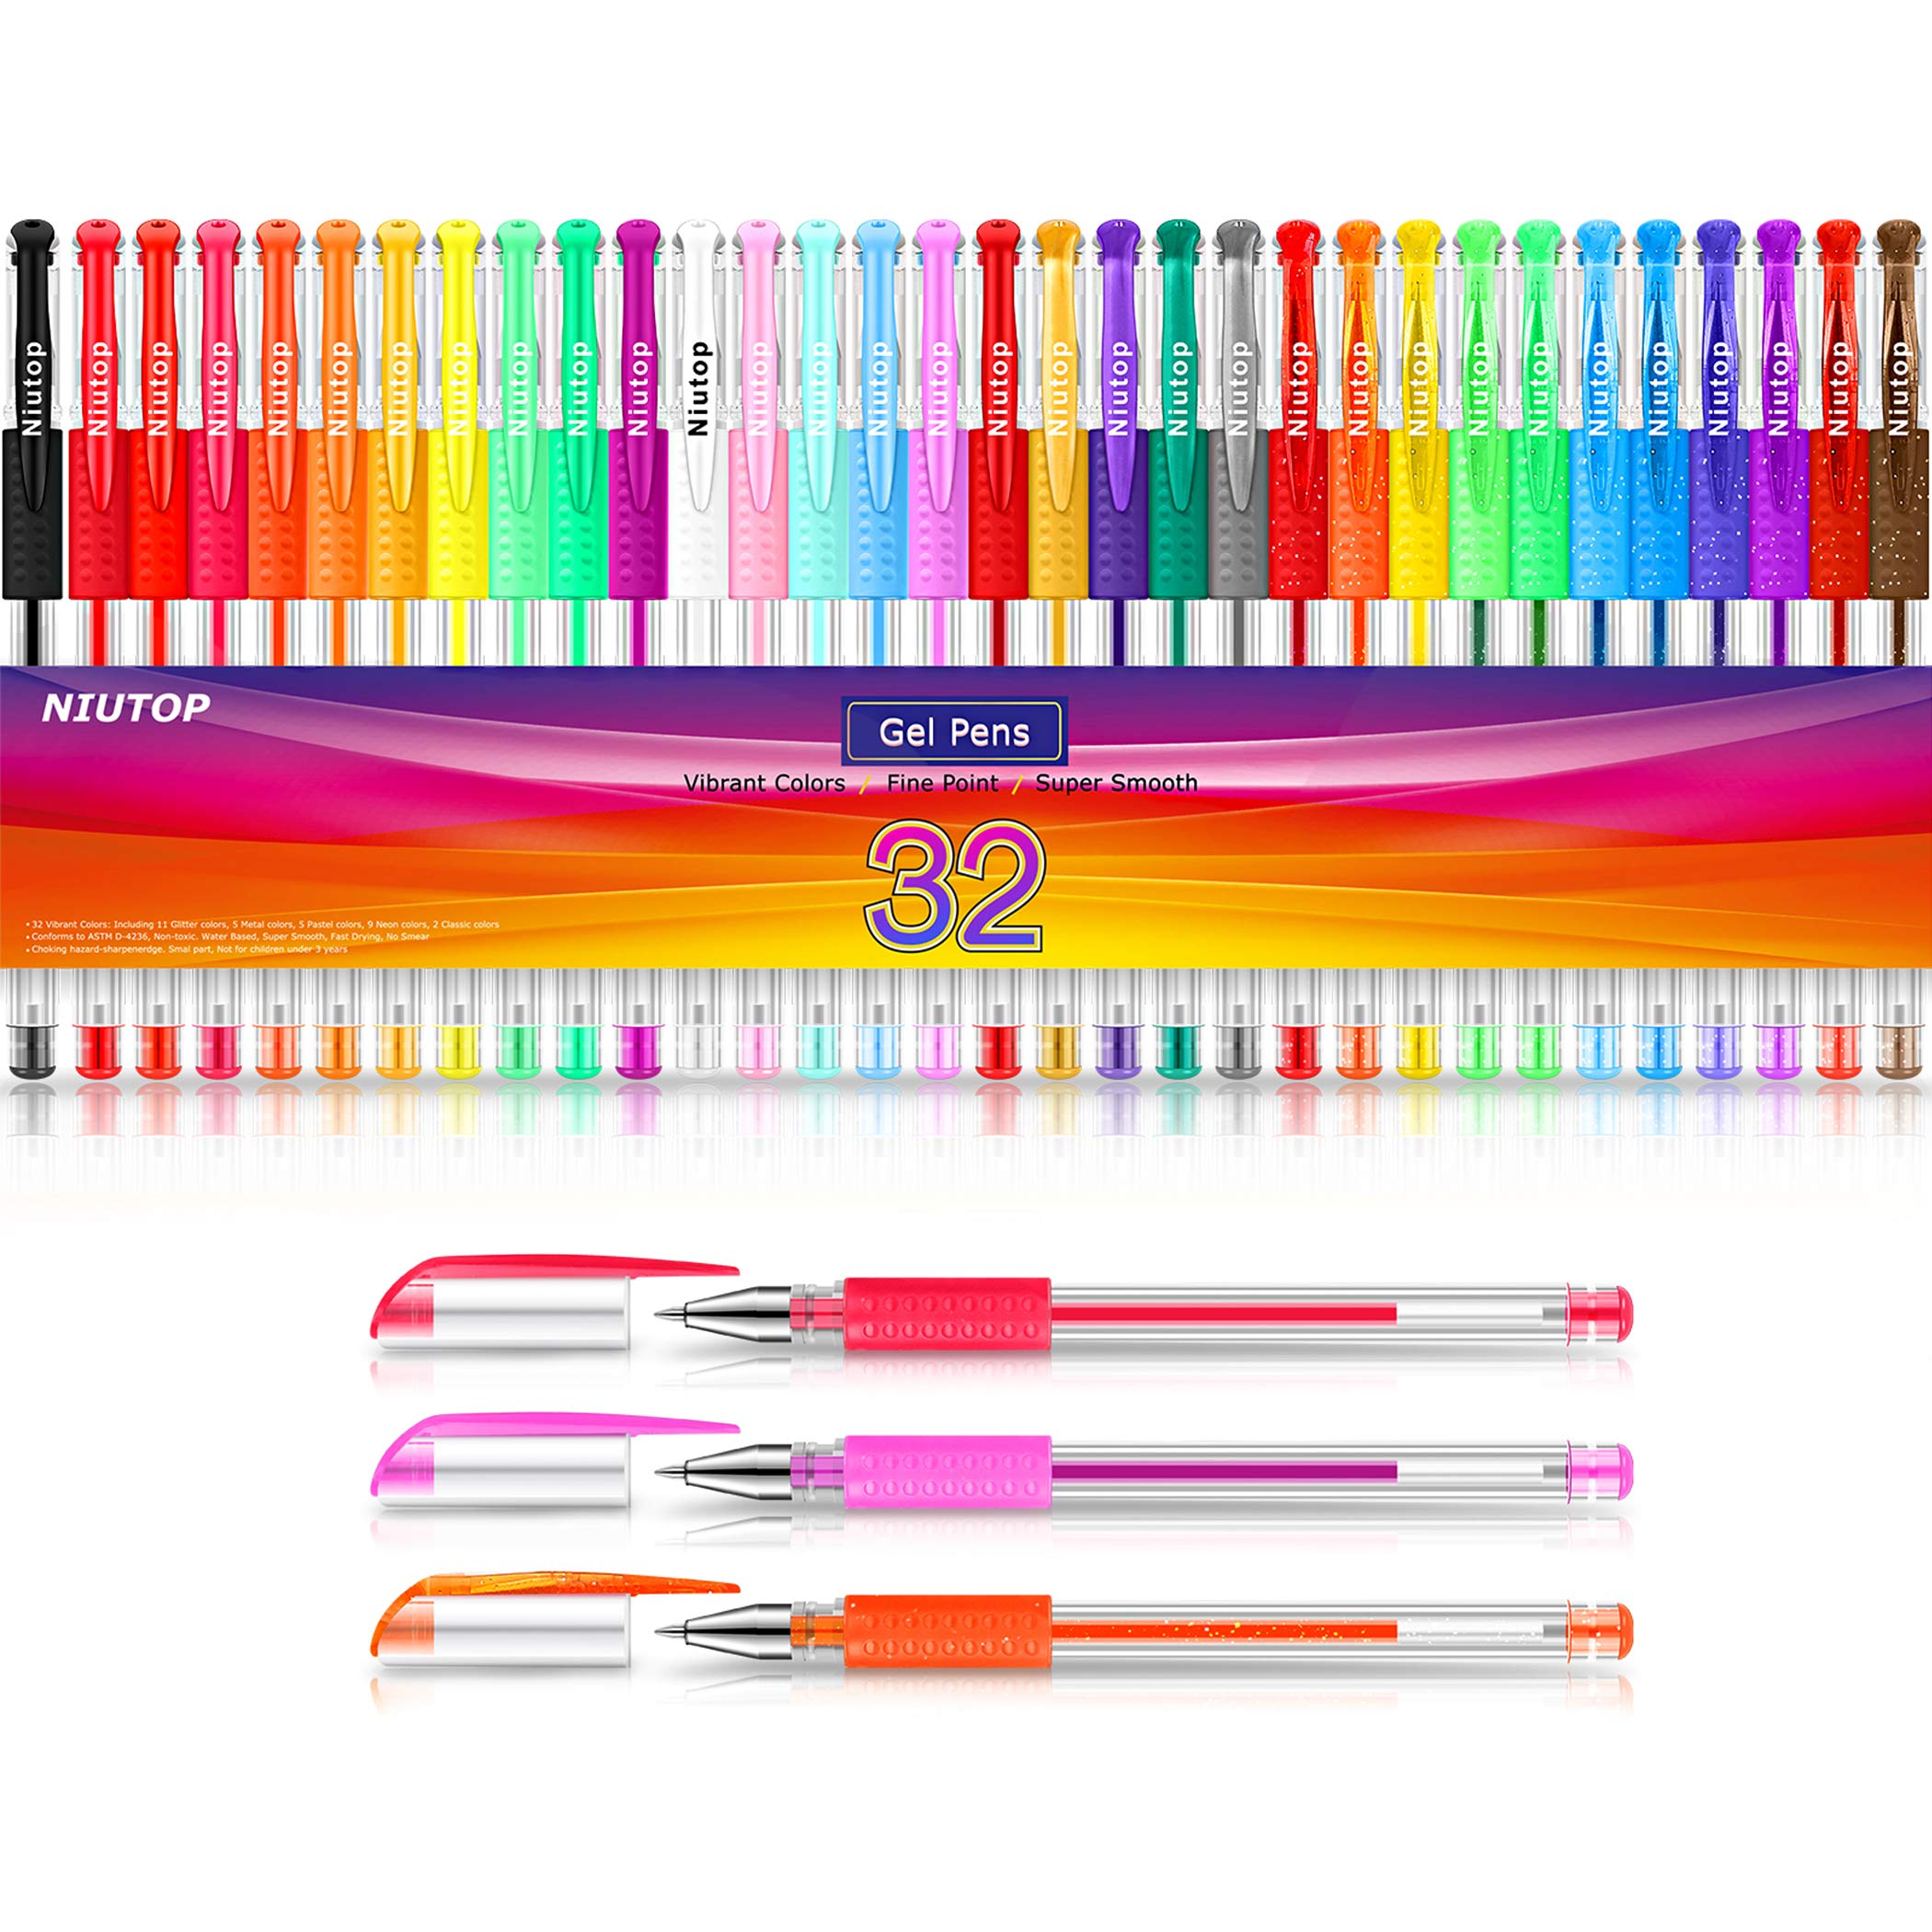 Shuttle Art Gel Pens, 32 Colors Gel Pen Set with Coloring Book for Adults Coloring Books Drawing Doodling Crafts Scrapbooking Journaling